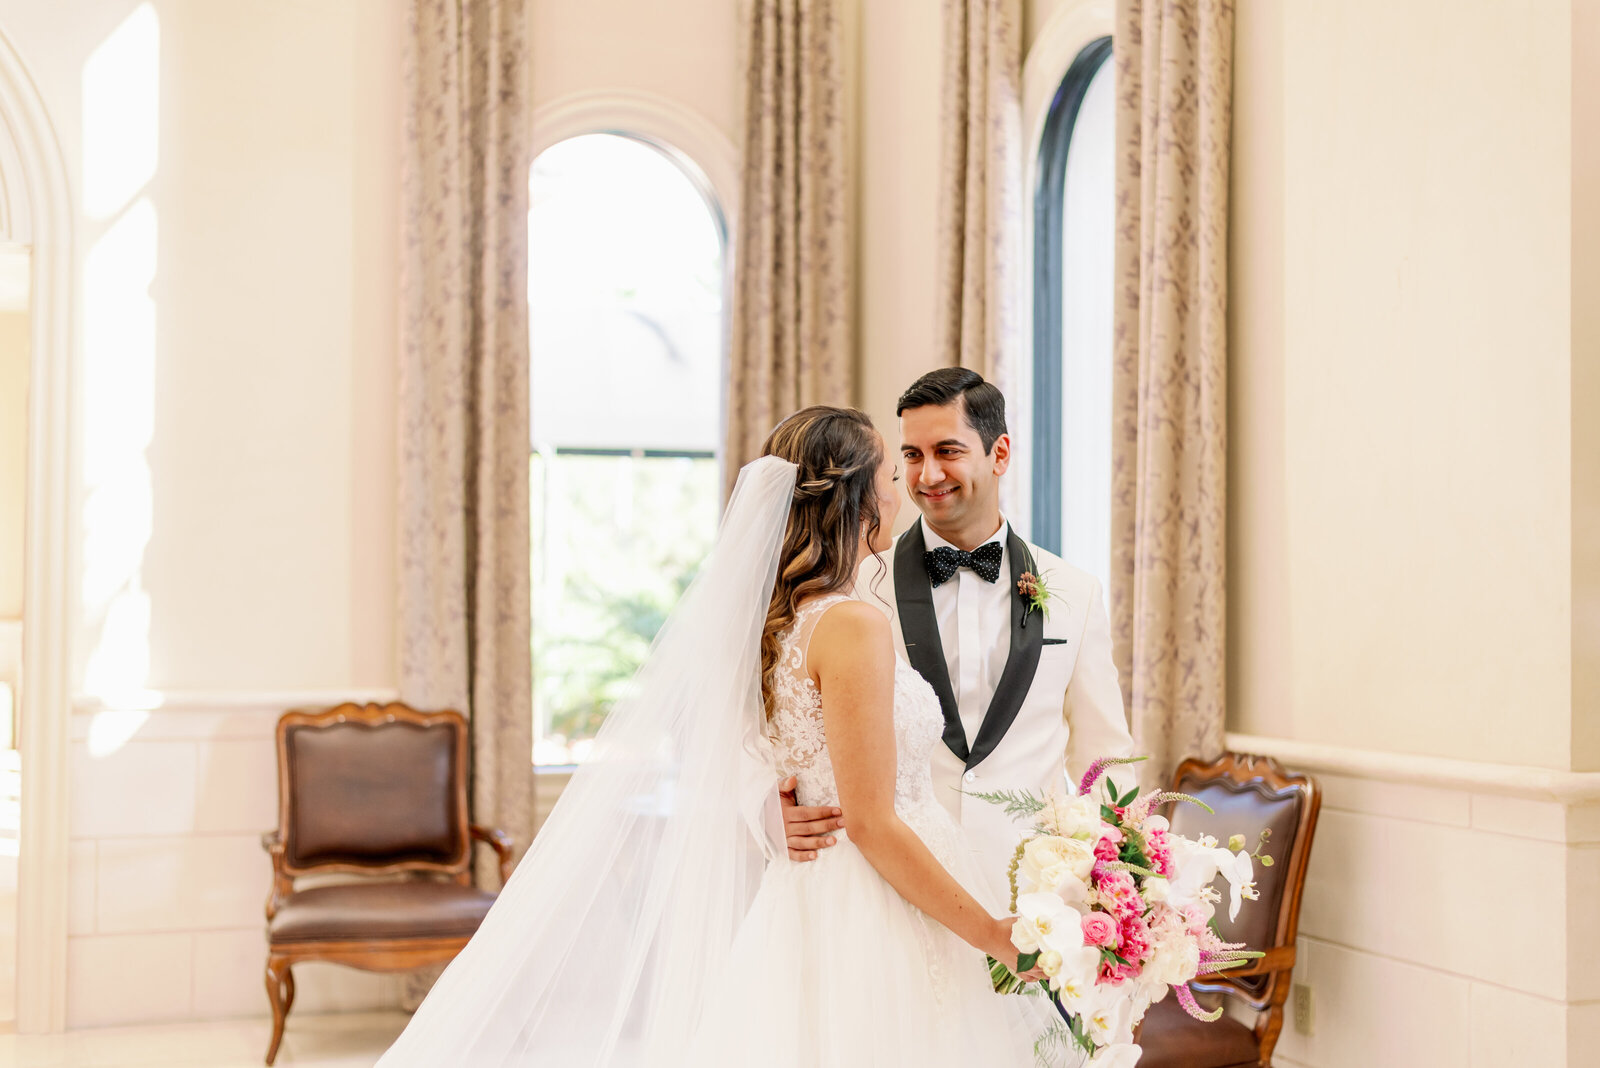 Groom looking at his bride with a big smile on his face in an elegant room